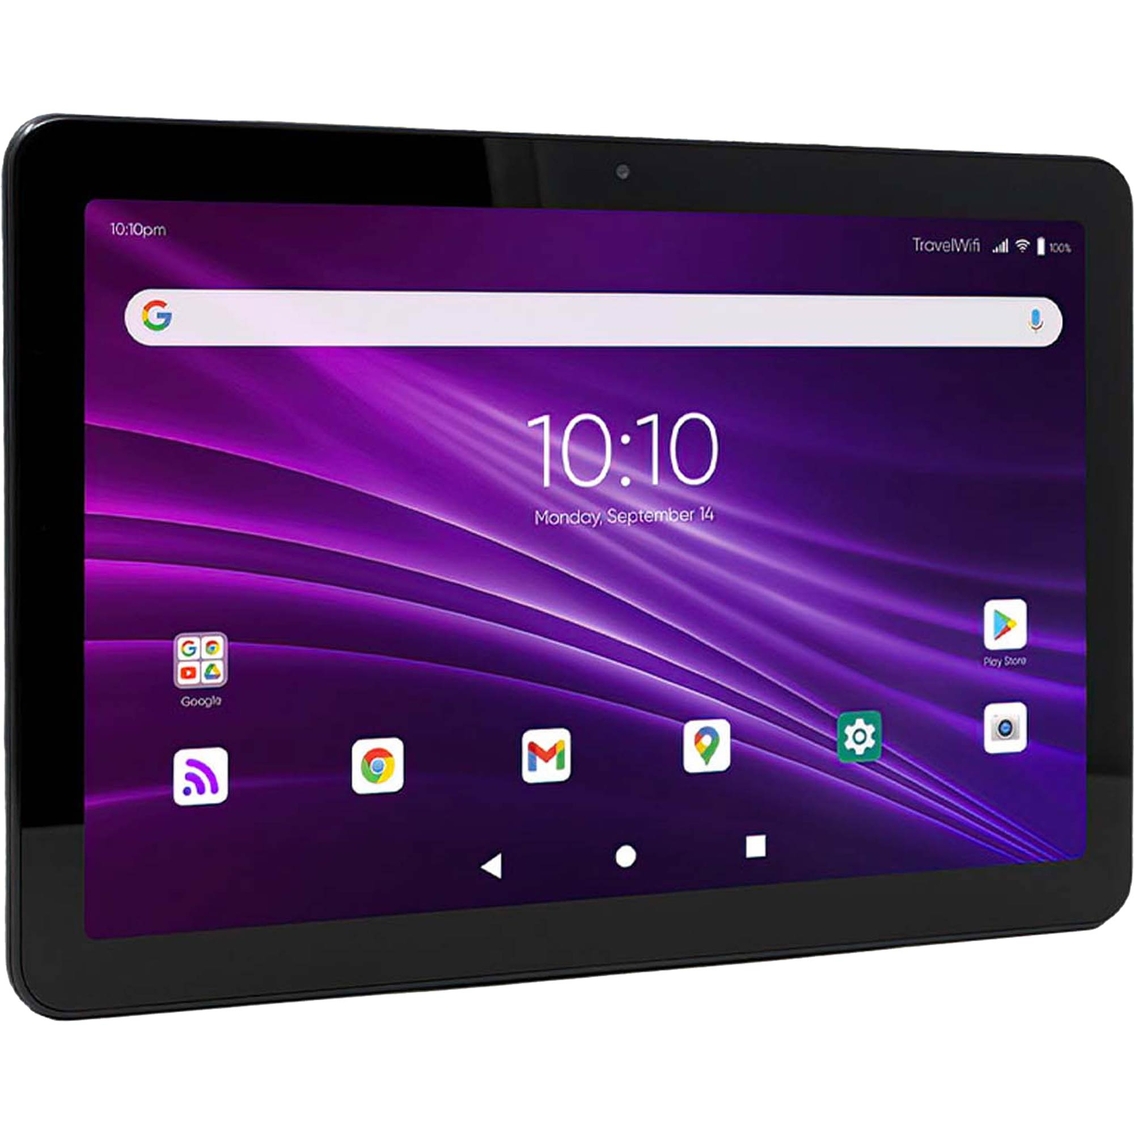 Sapphire 10 in. Android Hotspot Tablet - Image 2 of 5